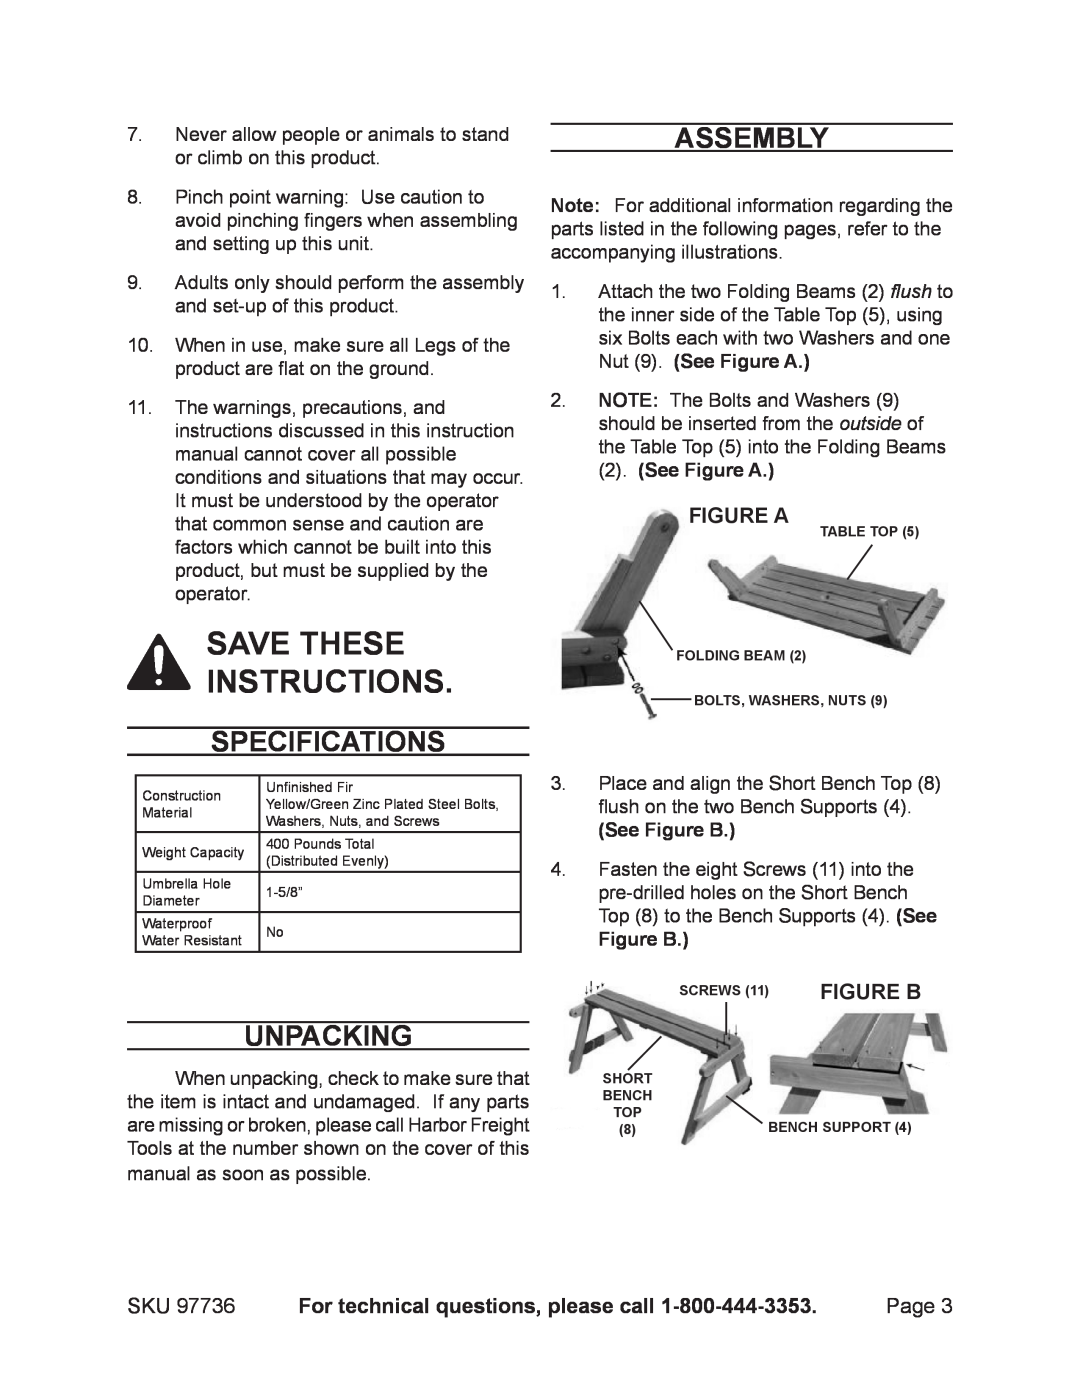 Harbor Freight Tools 97736 manual Save these instructions, Specifications, Unpacking, Assembly, Figure A 